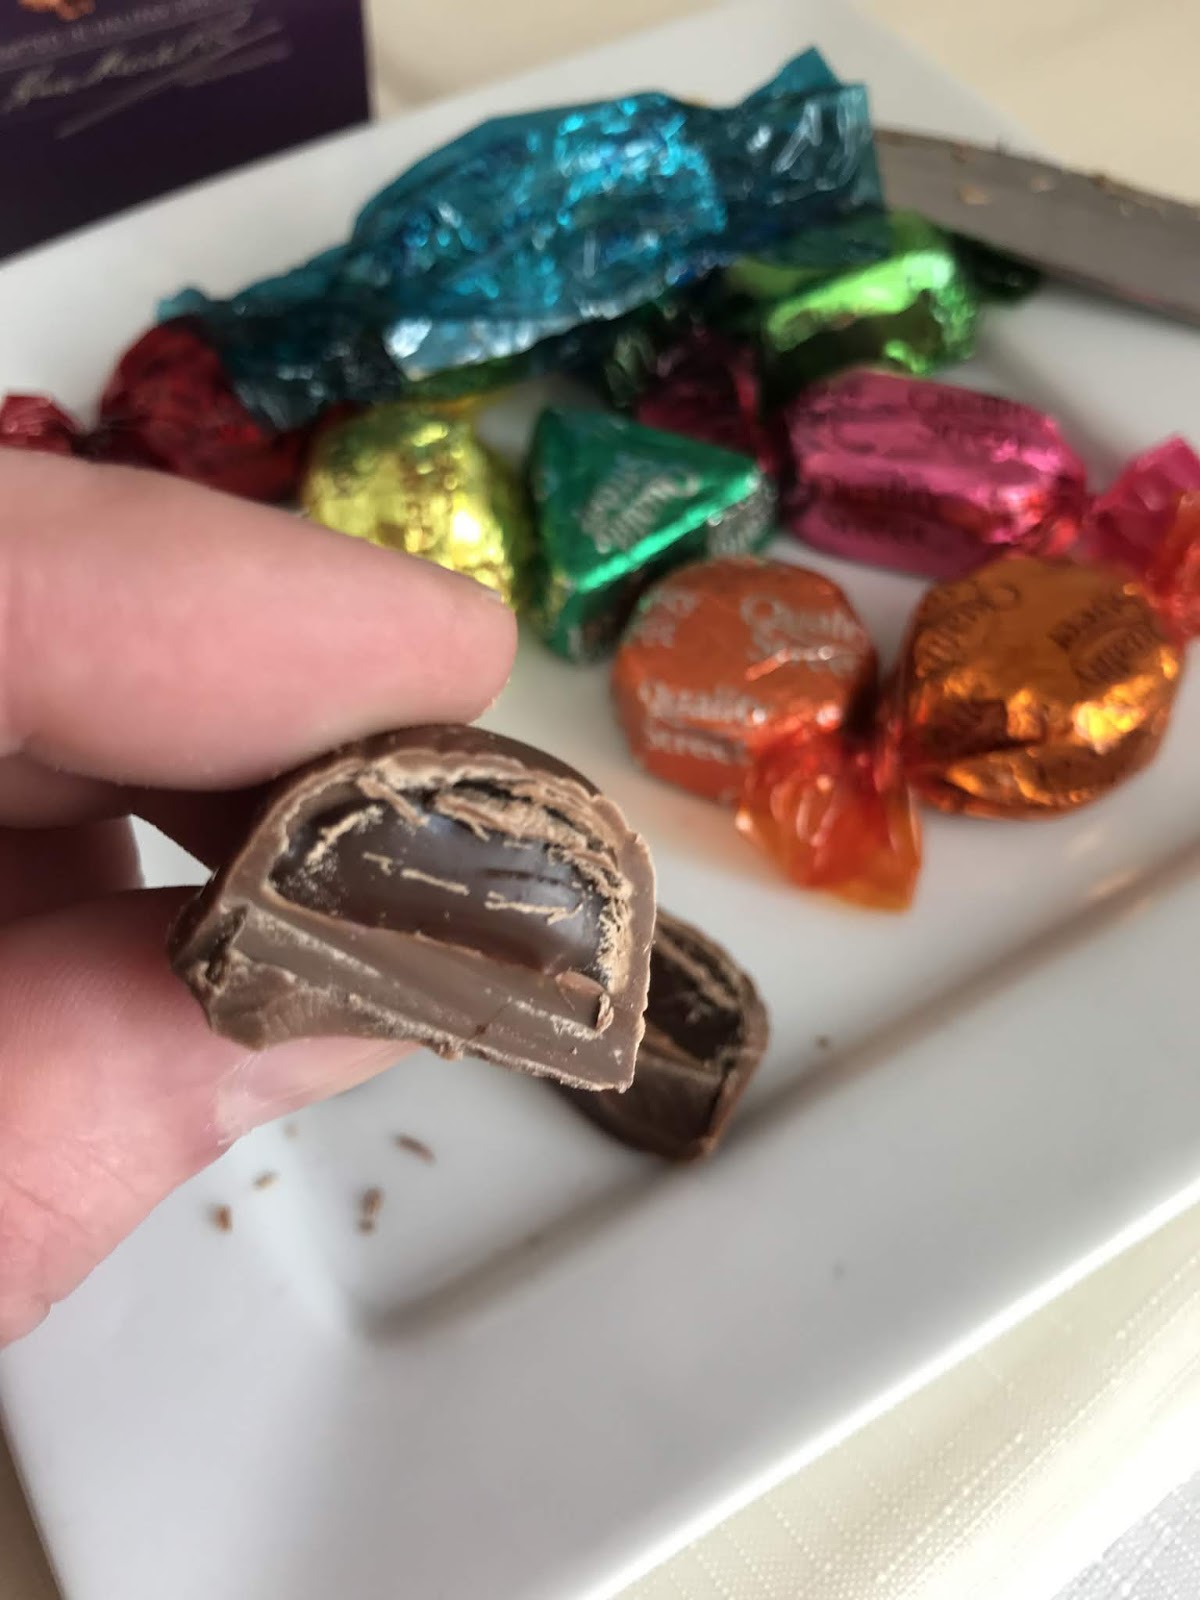 From Canada: Quality Street Chocolates & Caramels Review 